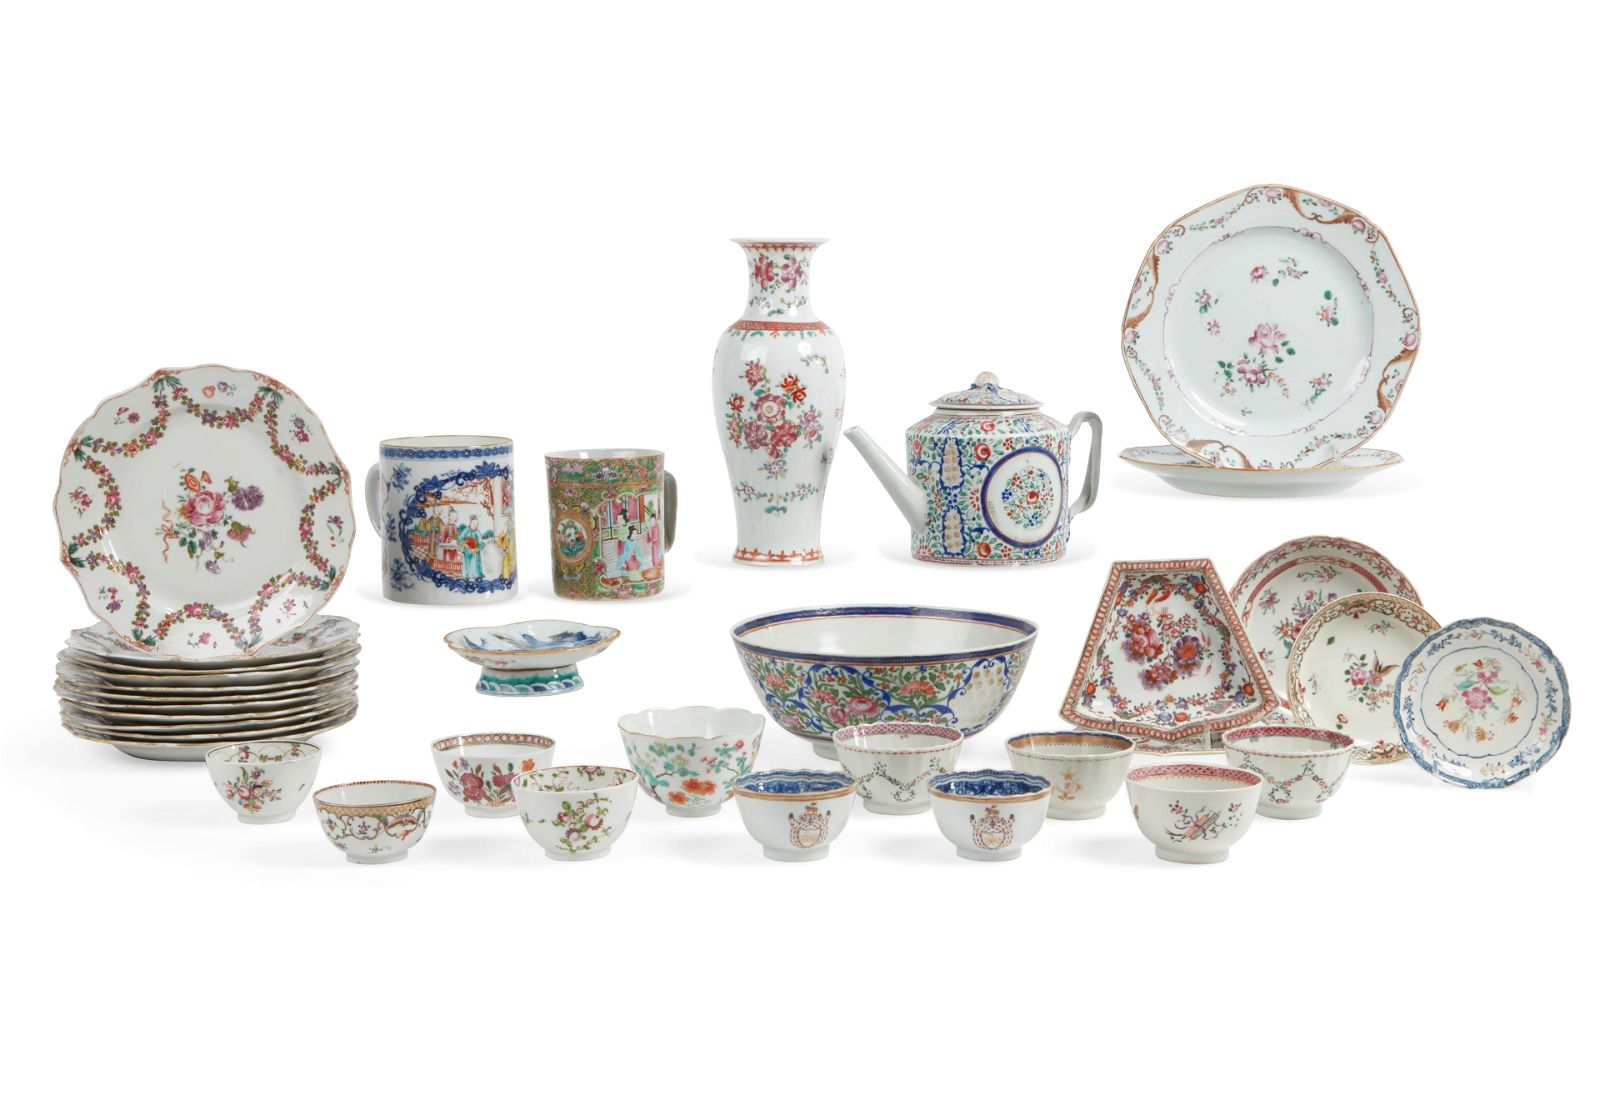 A GROUP OF CHINESE EXPORT PORCELAIN